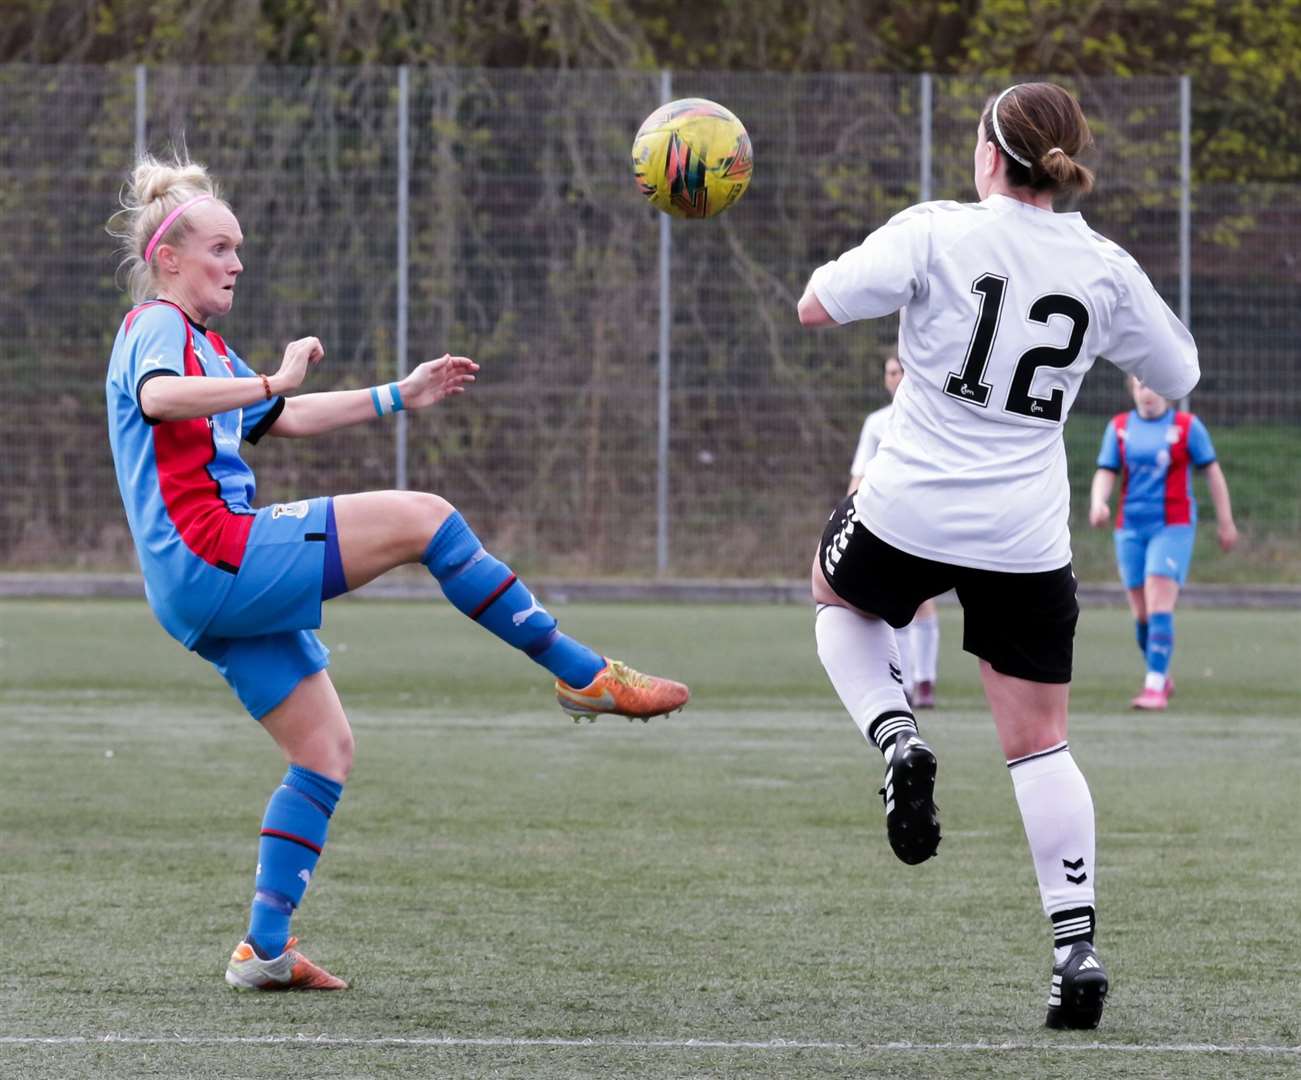 Julia Scott scored the winning goal for Caley Thistle against Dryburgh. Picture: Donald Cameron/Sportpix